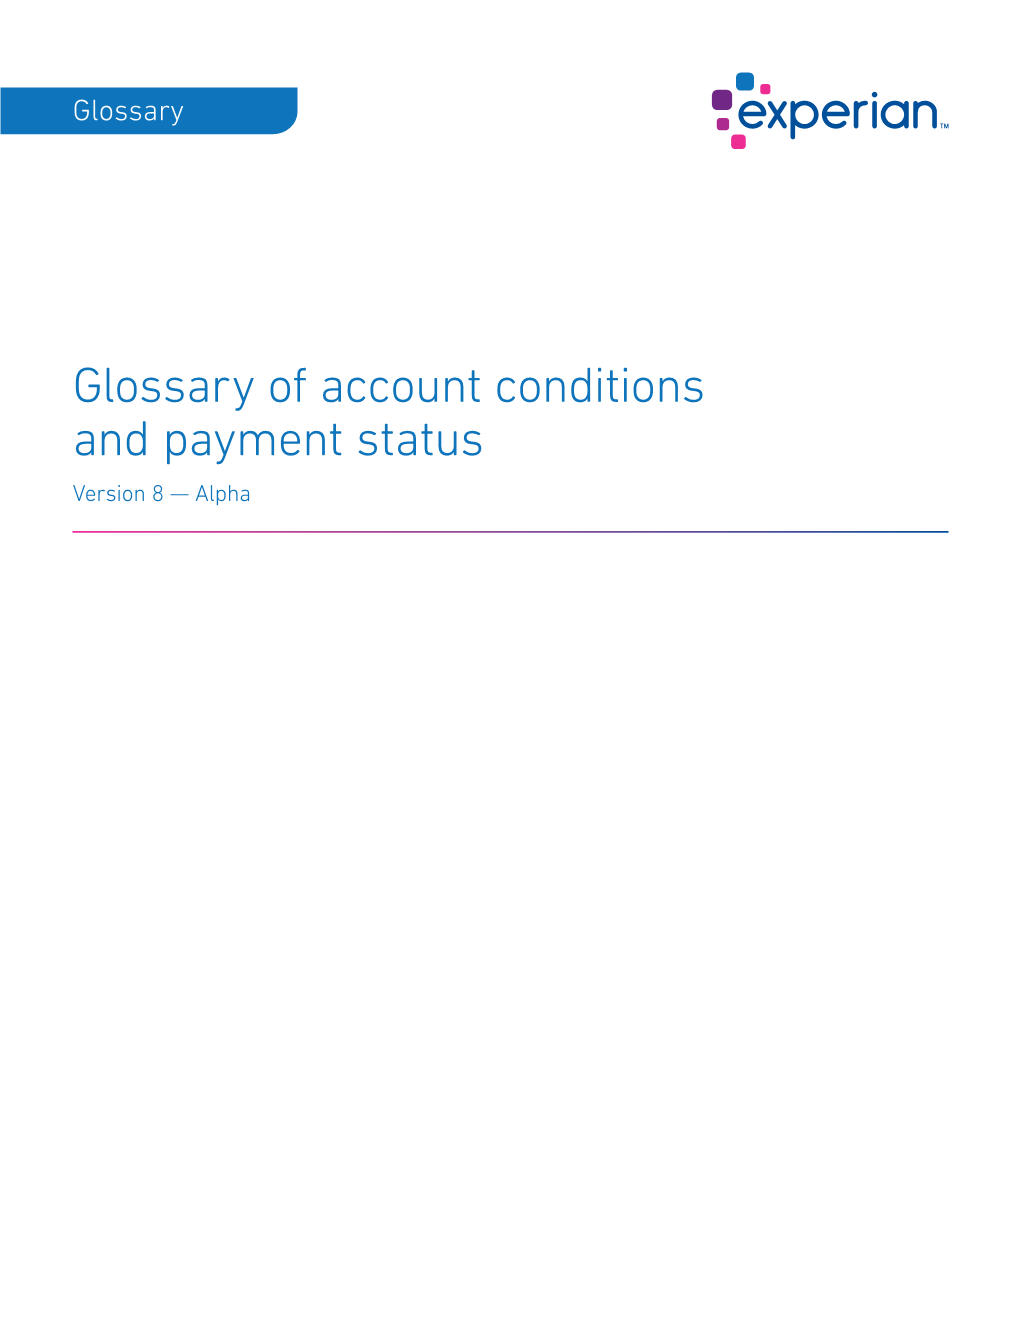 Glossary of Account Conditions and Payment Status Version 8 — Alpha Glossary Glossary of Account Conditions and Payment Status